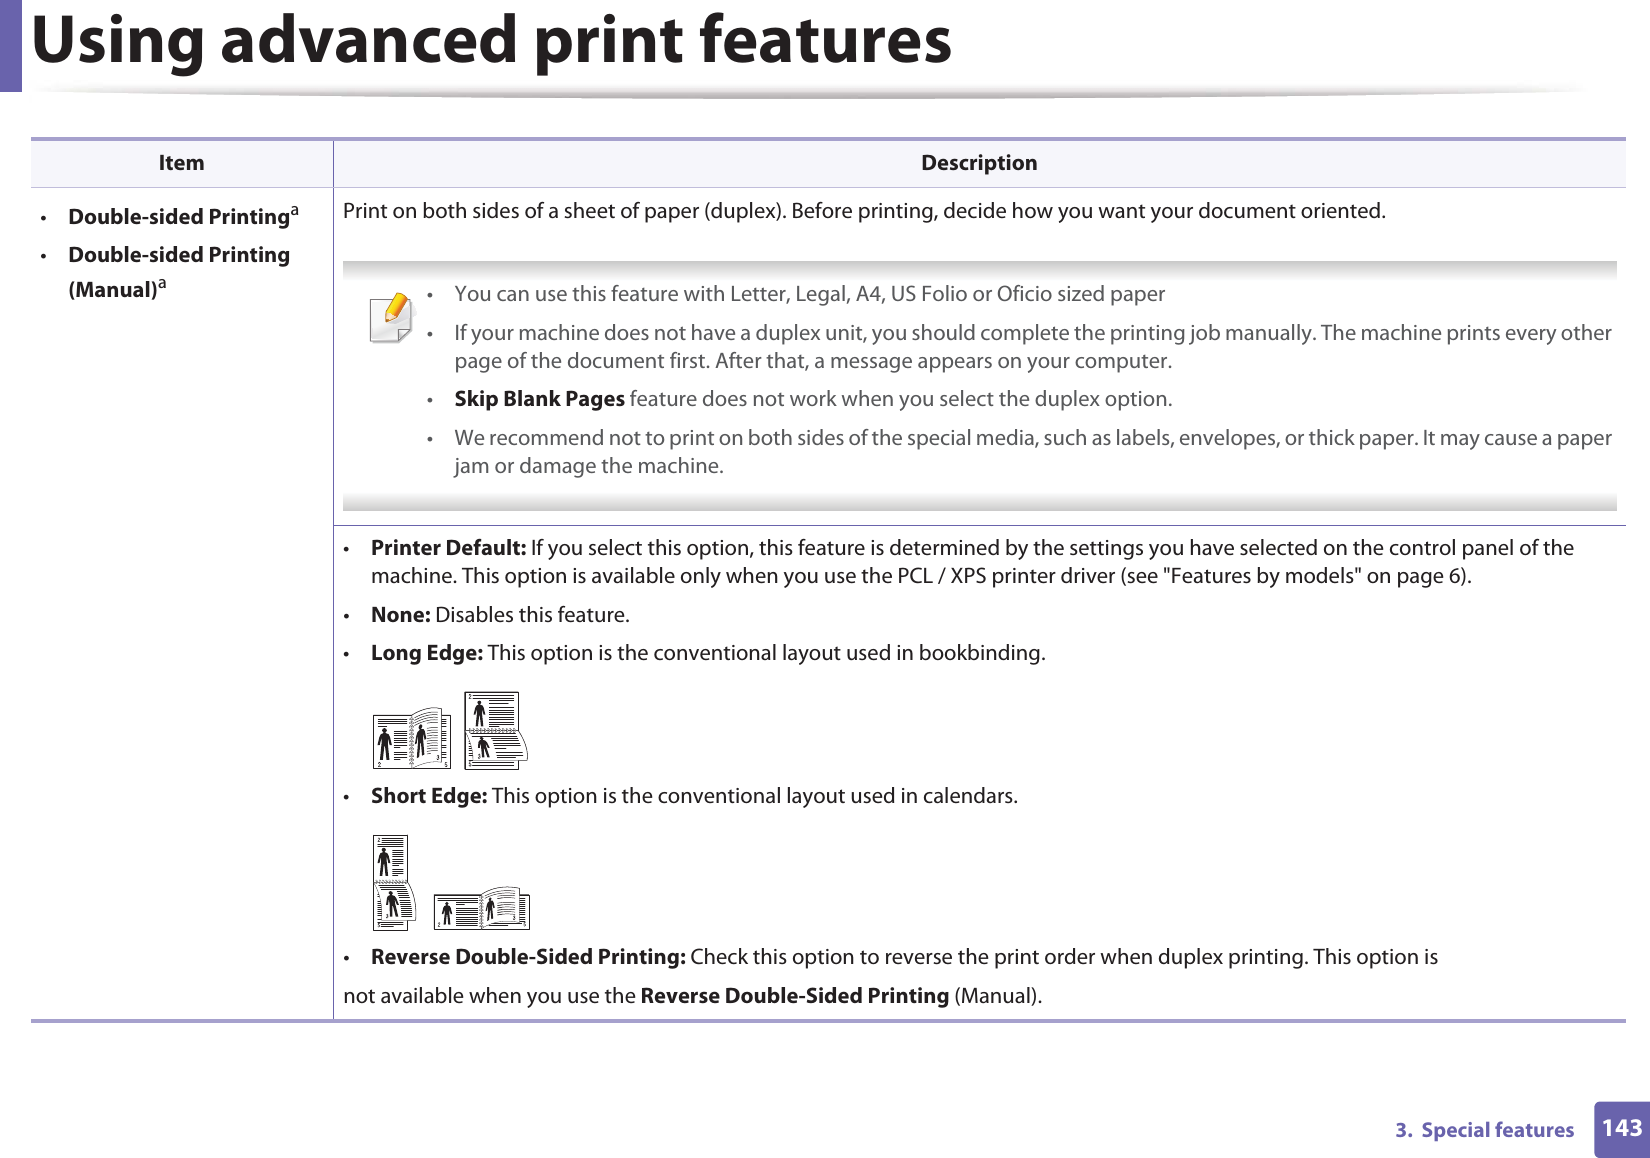 Using advanced print features1433.  Special features•Double-sided Printinga•Double-sided Printing (Manual)aPrint on both sides of a sheet of paper (duplex). Before printing, decide how you want your document oriented.  • You can use this feature with Letter, Legal, A4, US Folio or Oficio sized paper • If your machine does not have a duplex unit, you should complete the printing job manually. The machine prints every other page of the document first. After that, a message appears on your computer.•Skip Blank Pages feature does not work when you select the duplex option.• We recommend not to print on both sides of the special media, such as labels, envelopes, or thick paper. It may cause a paper jam or damage the machine. •Printer Default: If you select this option, this feature is determined by the settings you have selected on the control panel of the machine. This option is available only when you use the PCL / XPS printer driver (see &quot;Features by models&quot; on page 6).•None: Disables this feature.•Long Edge: This option is the conventional layout used in bookbinding.•Short Edge: This option is the conventional layout used in calendars.•Reverse Double-Sided Printing: Check this option to reverse the print order when duplex printing. This option isnot available when you use the Reverse Double-Sided Printing (Manual).Item Description